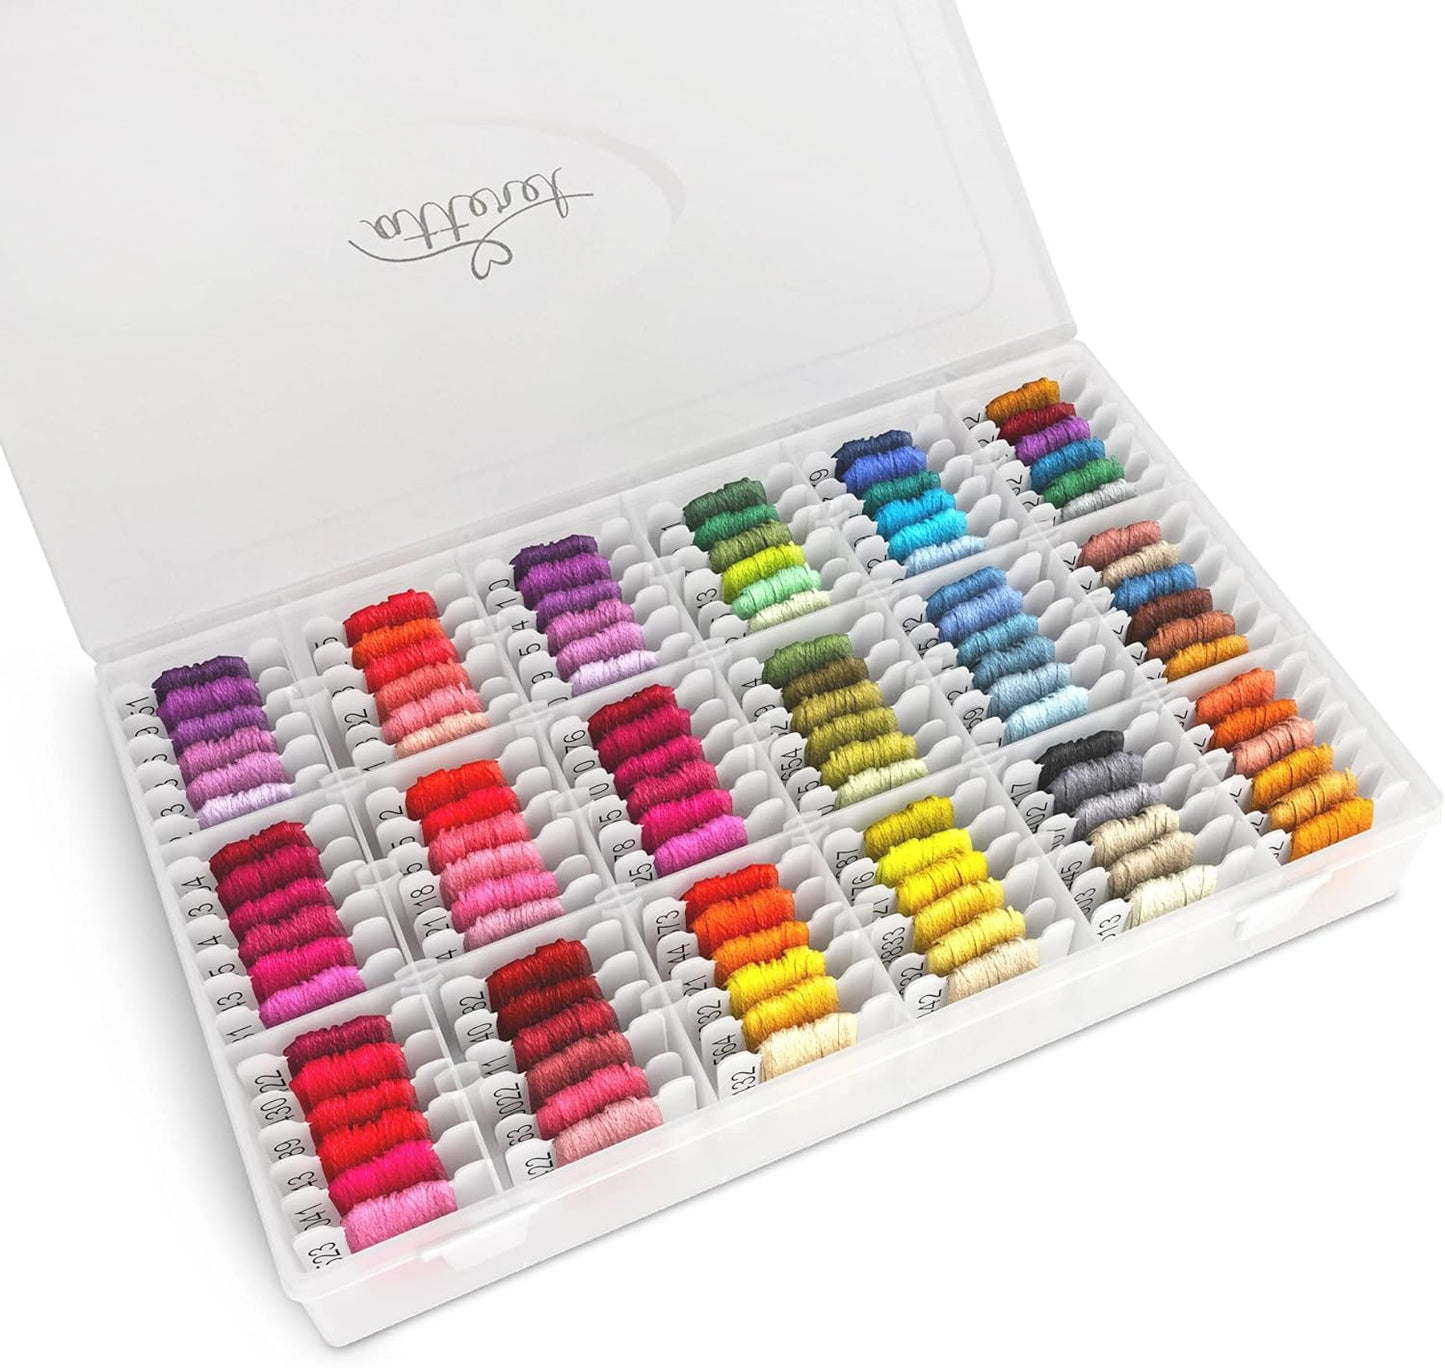 Embroidery Floss Kit 108 Colors 99 Cotton 9 Metallic Threads. on Plastic Bobbins in Organizer Storage Box. Dmc Color Coding. for Cross Stitch, Friendship Bracelets, String Crafts